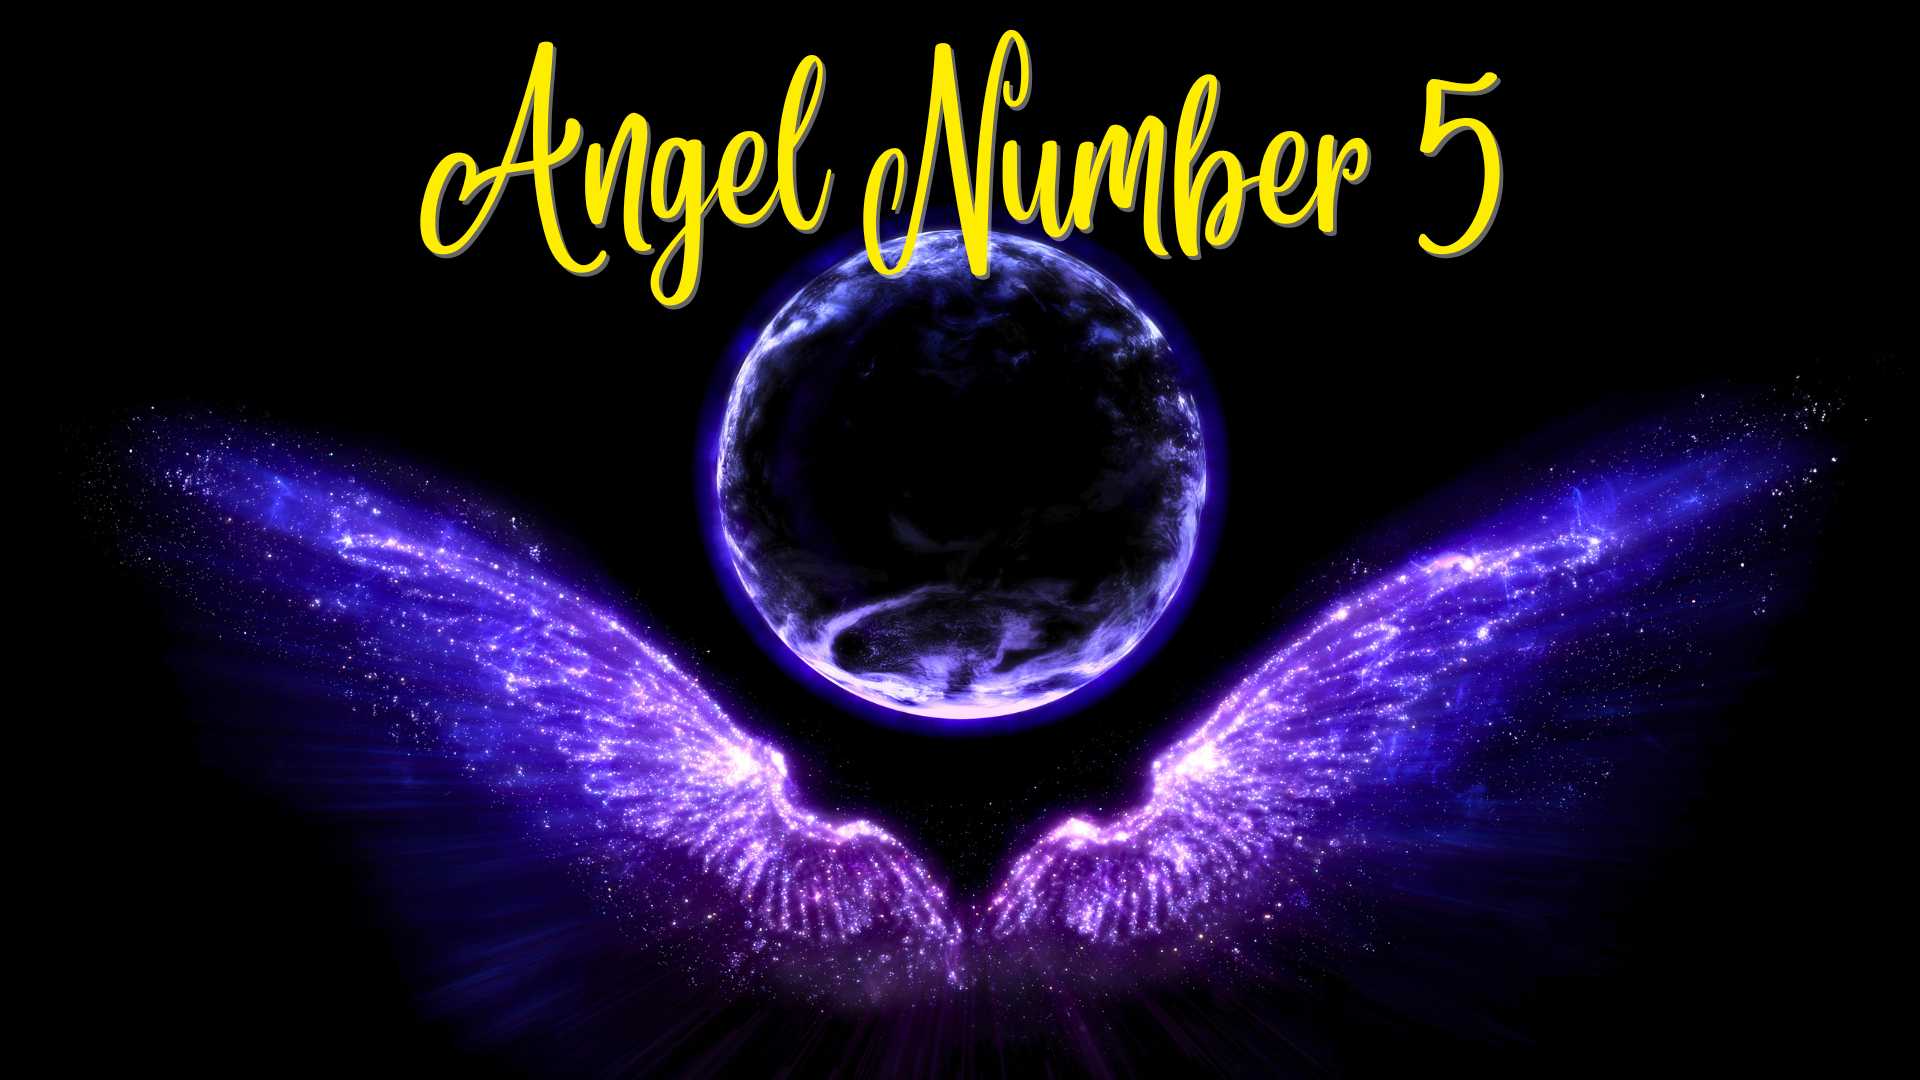 Angel Number 15 Meaning featured image